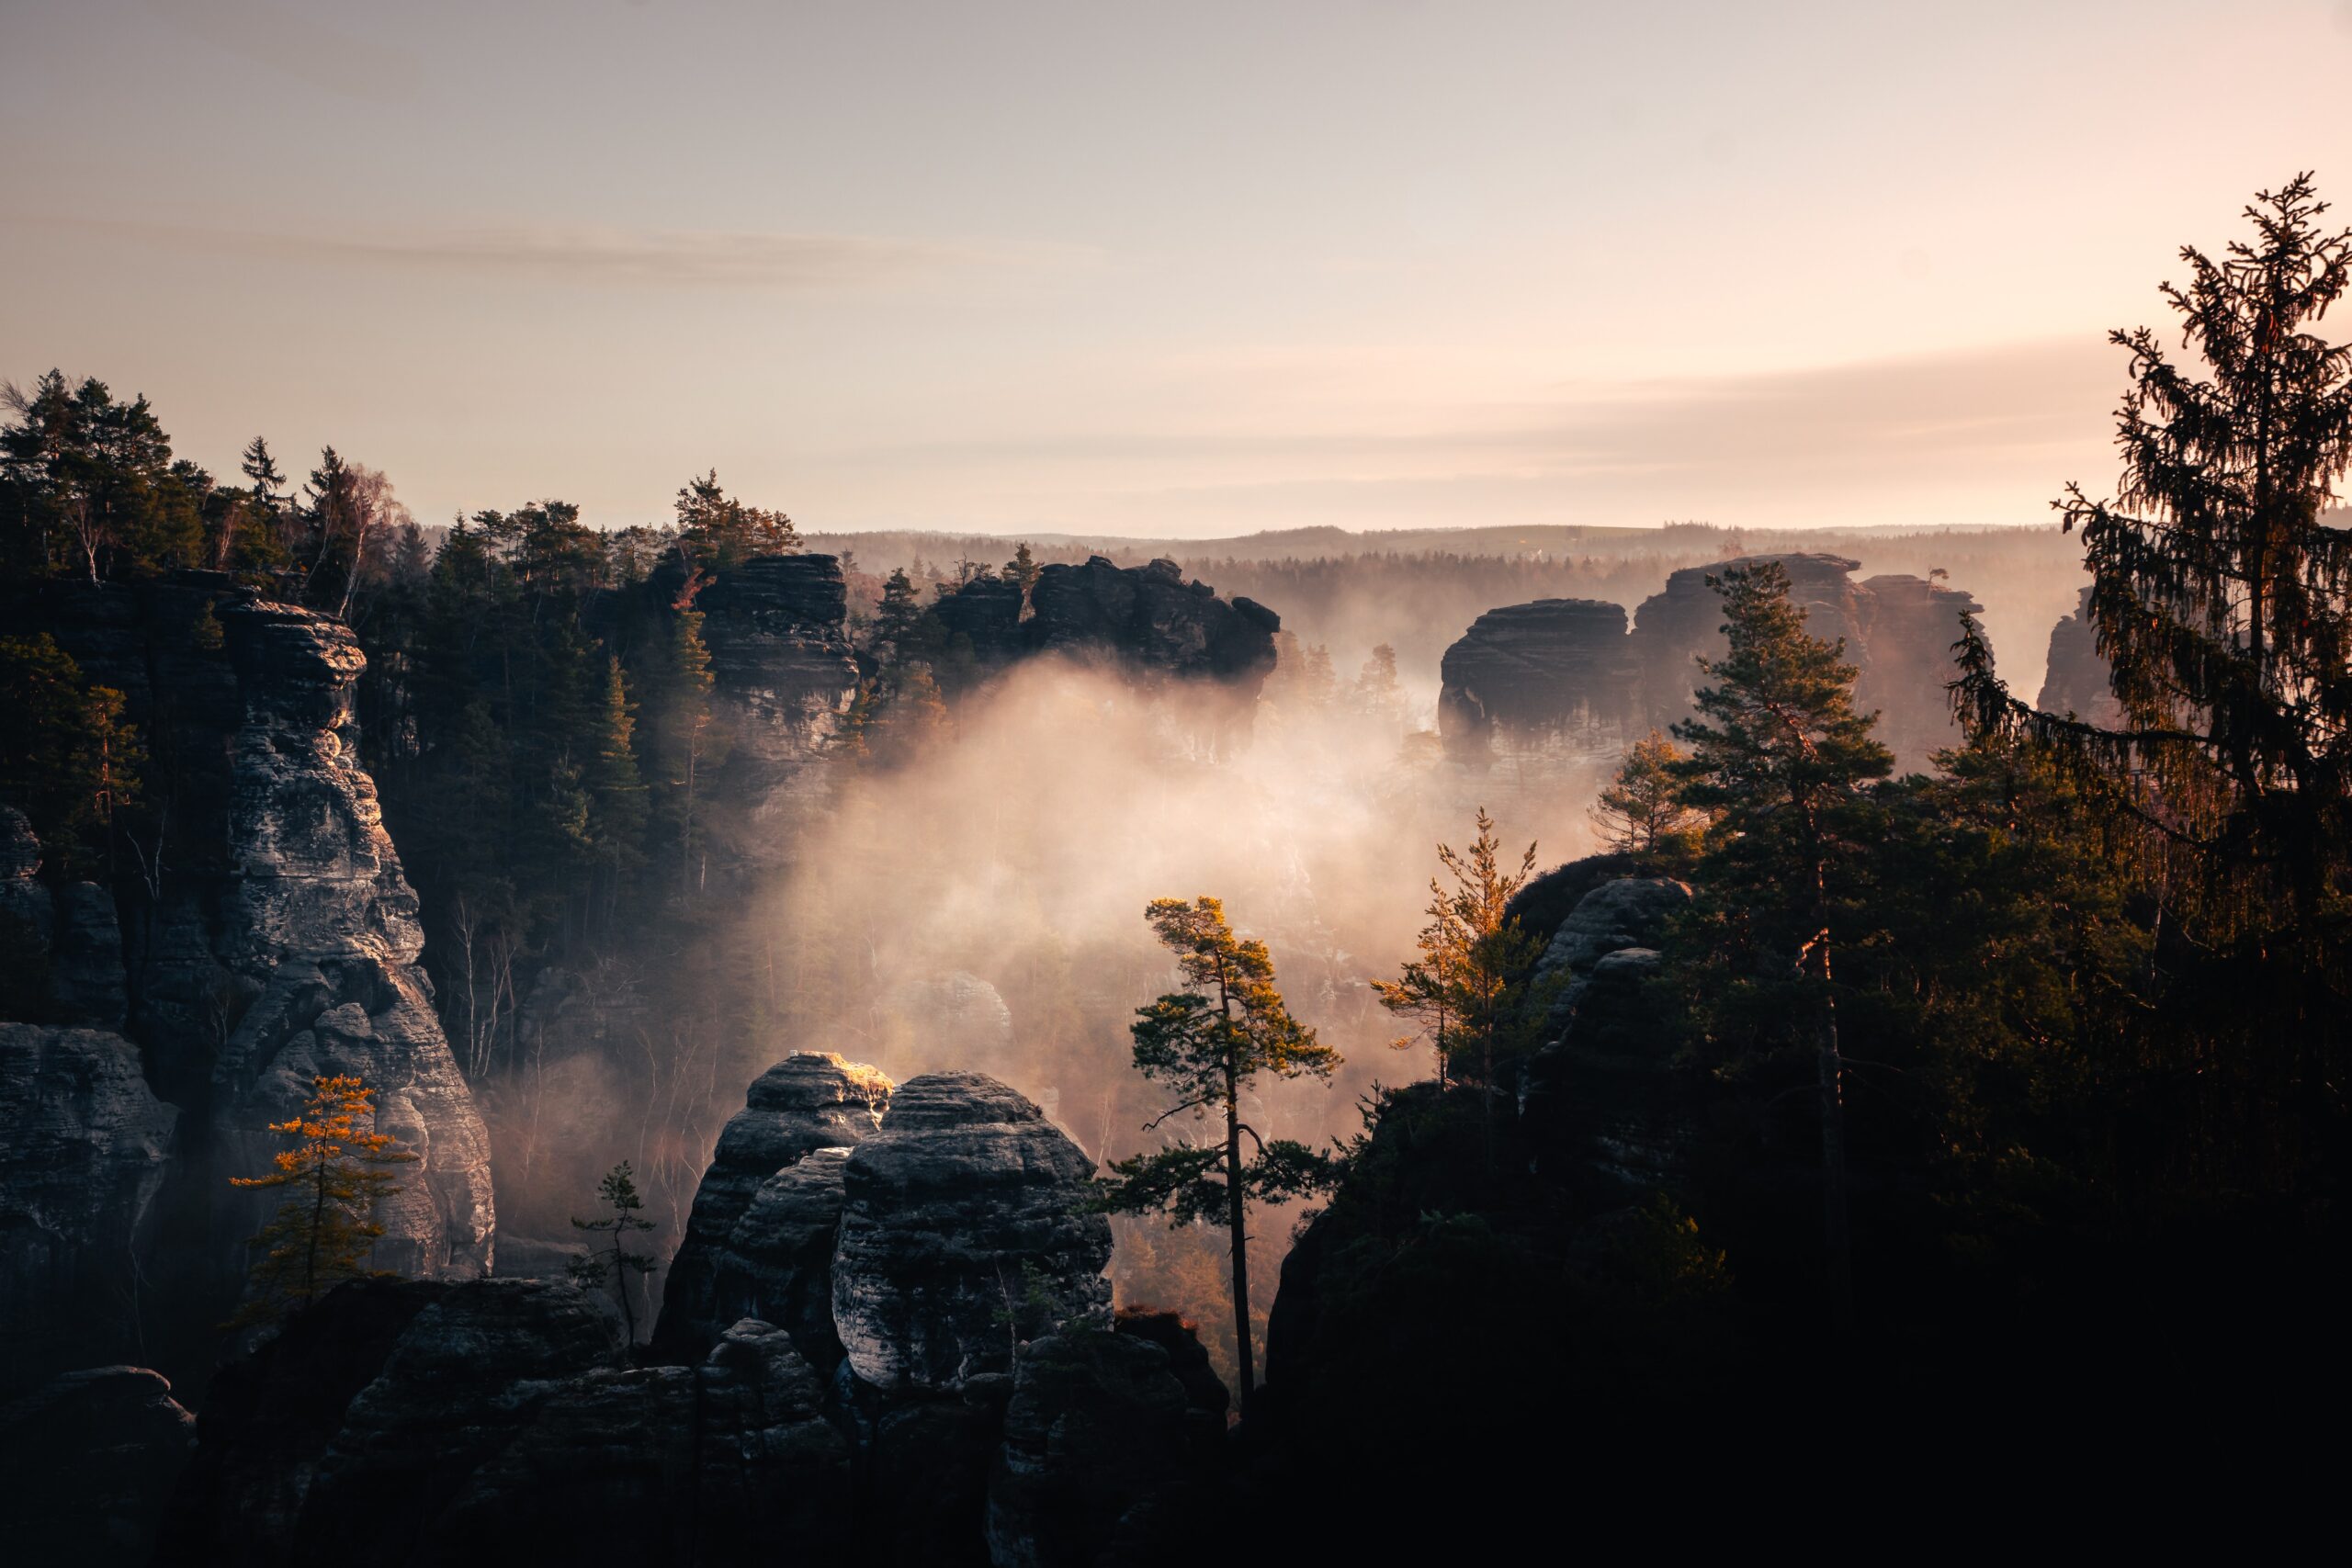 Visiting the Bastei Bridge is one of the best things you can do in Germany